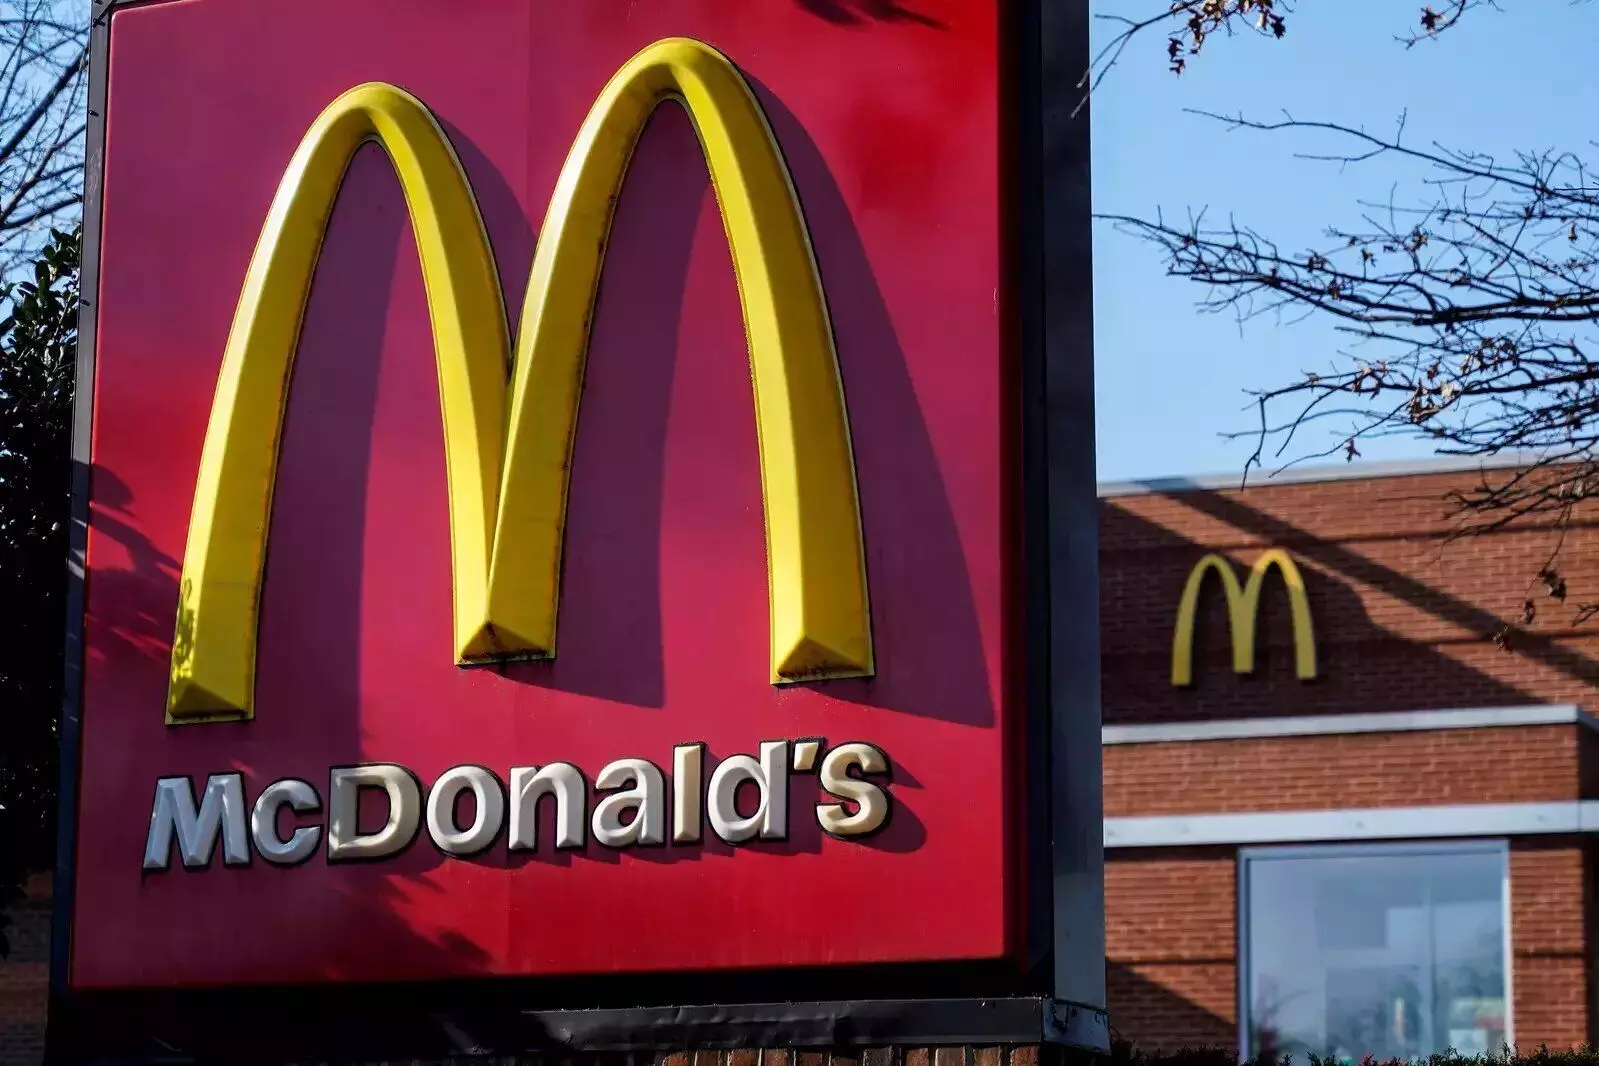 Maha food regulator suspended McDonalds outlets licence, now revokes it. Why?